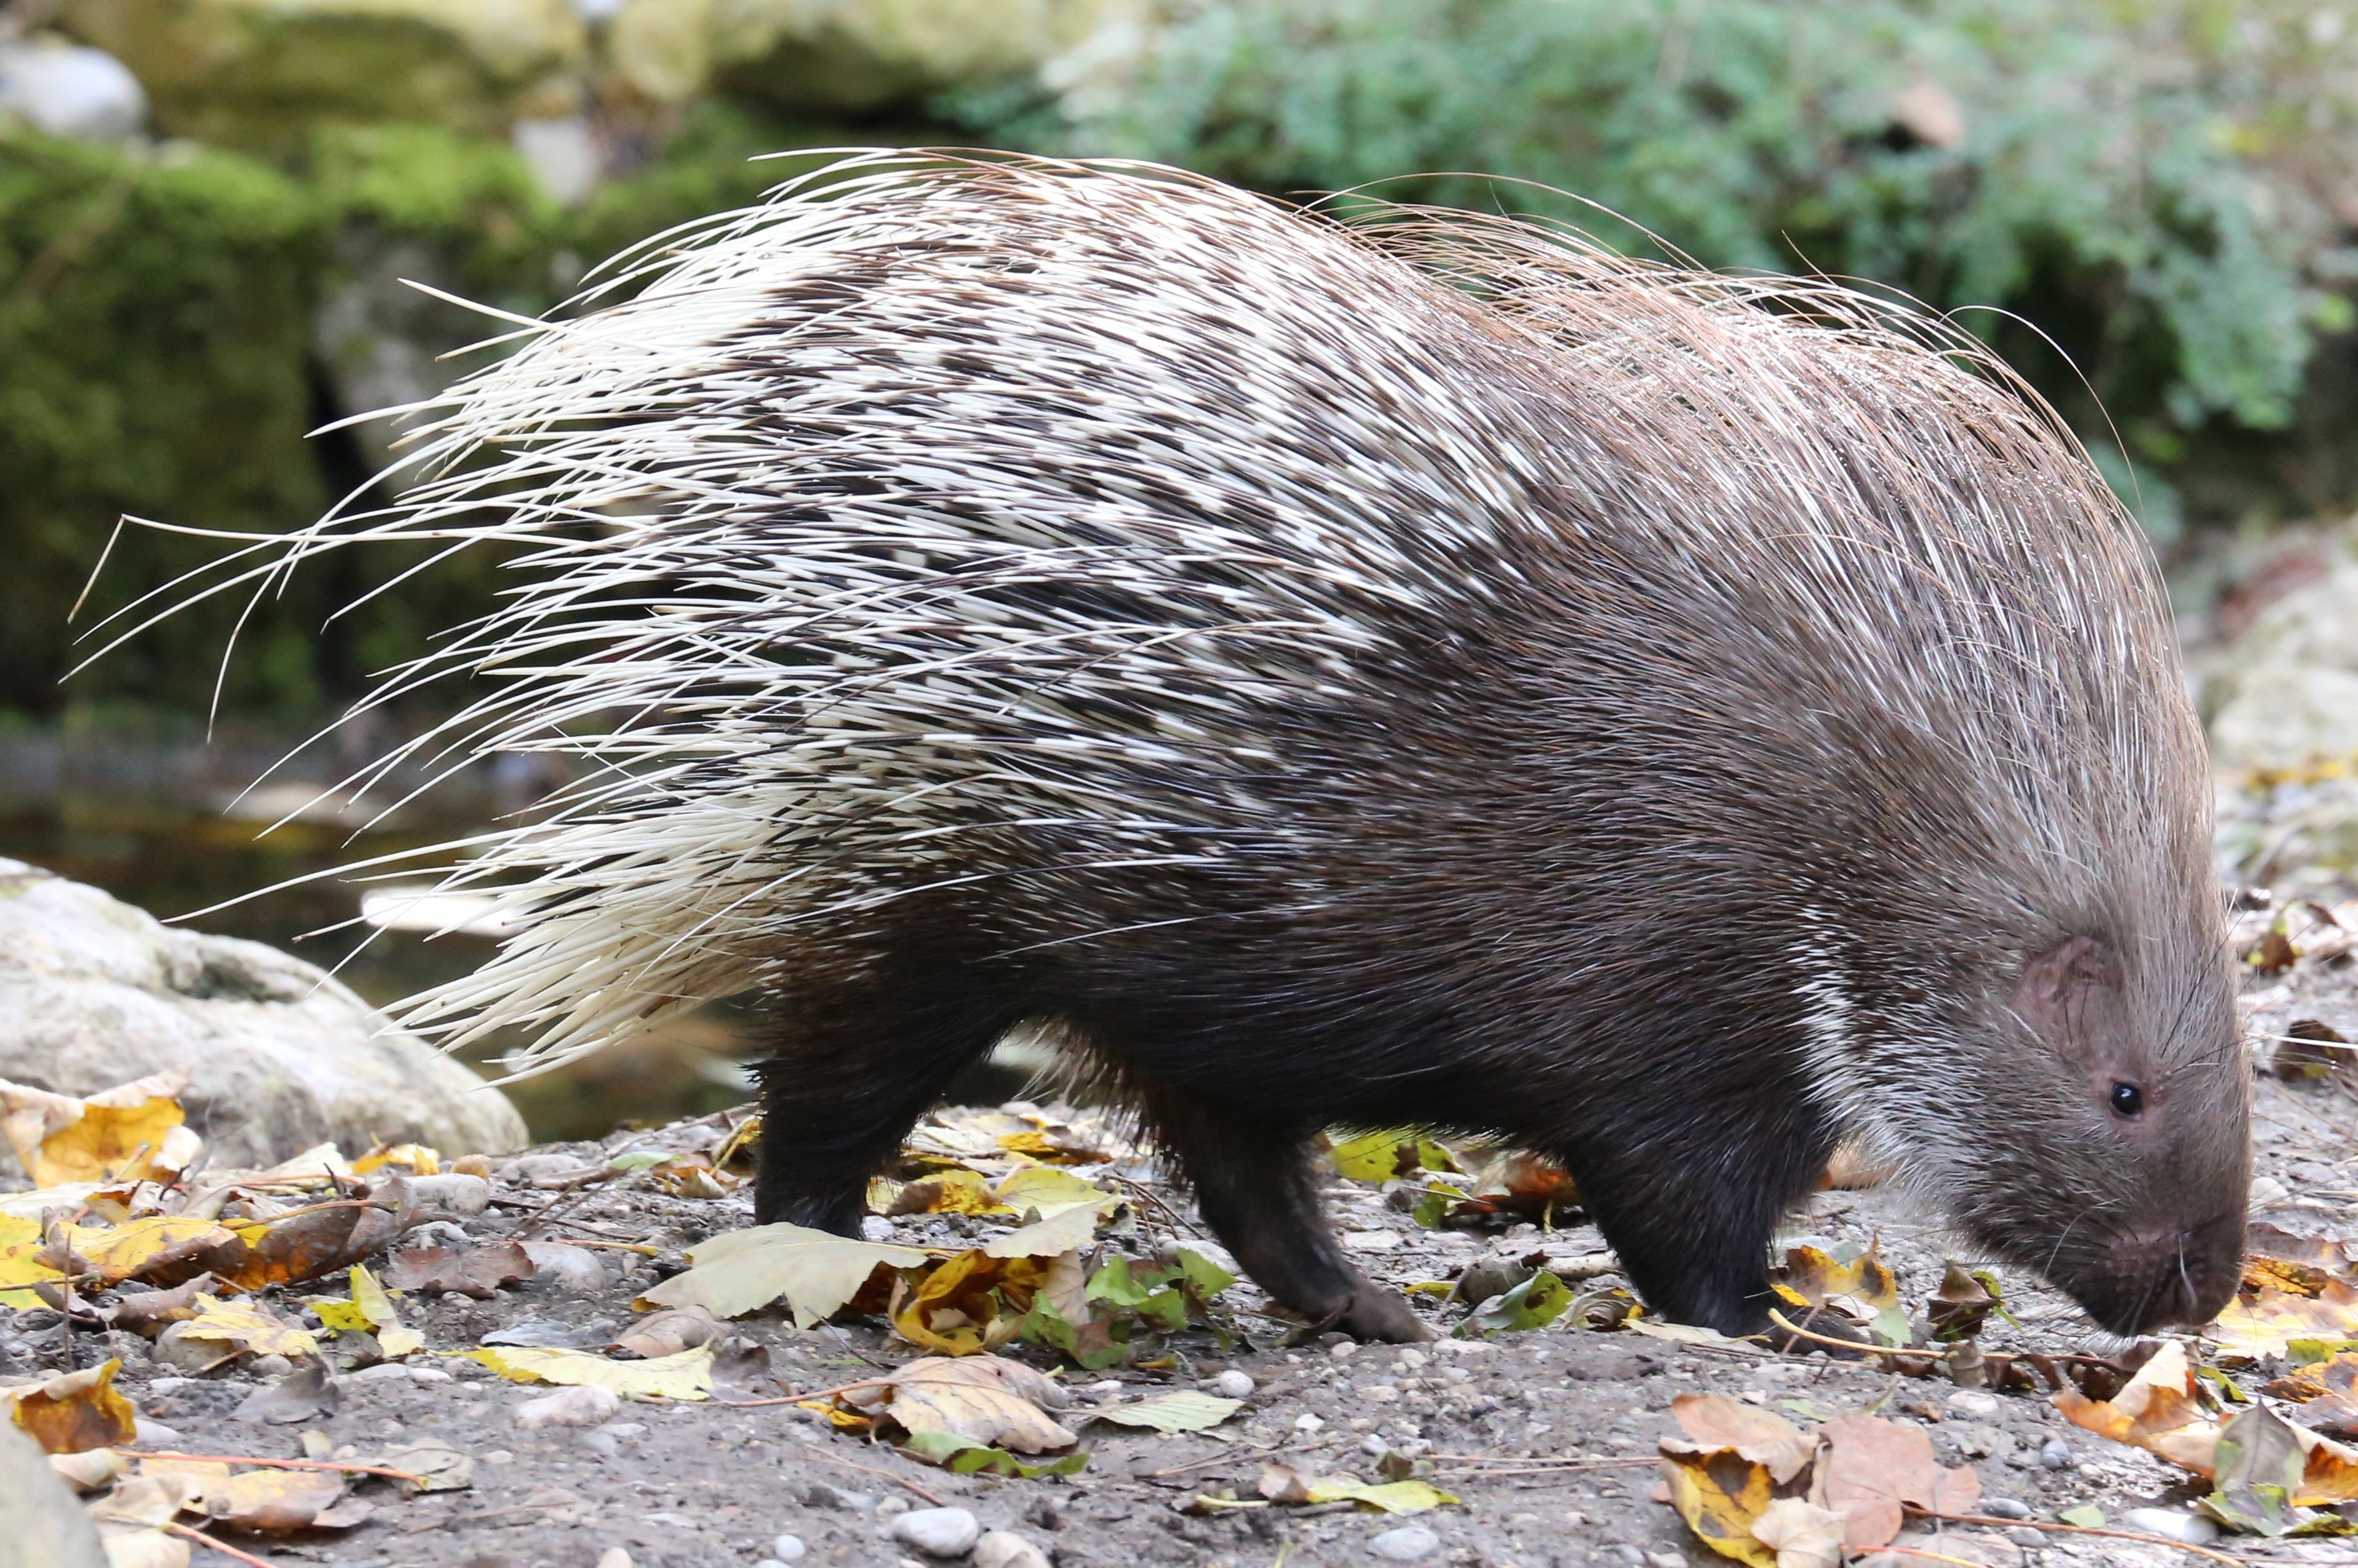 Indian crested porcupine - Wikipedia